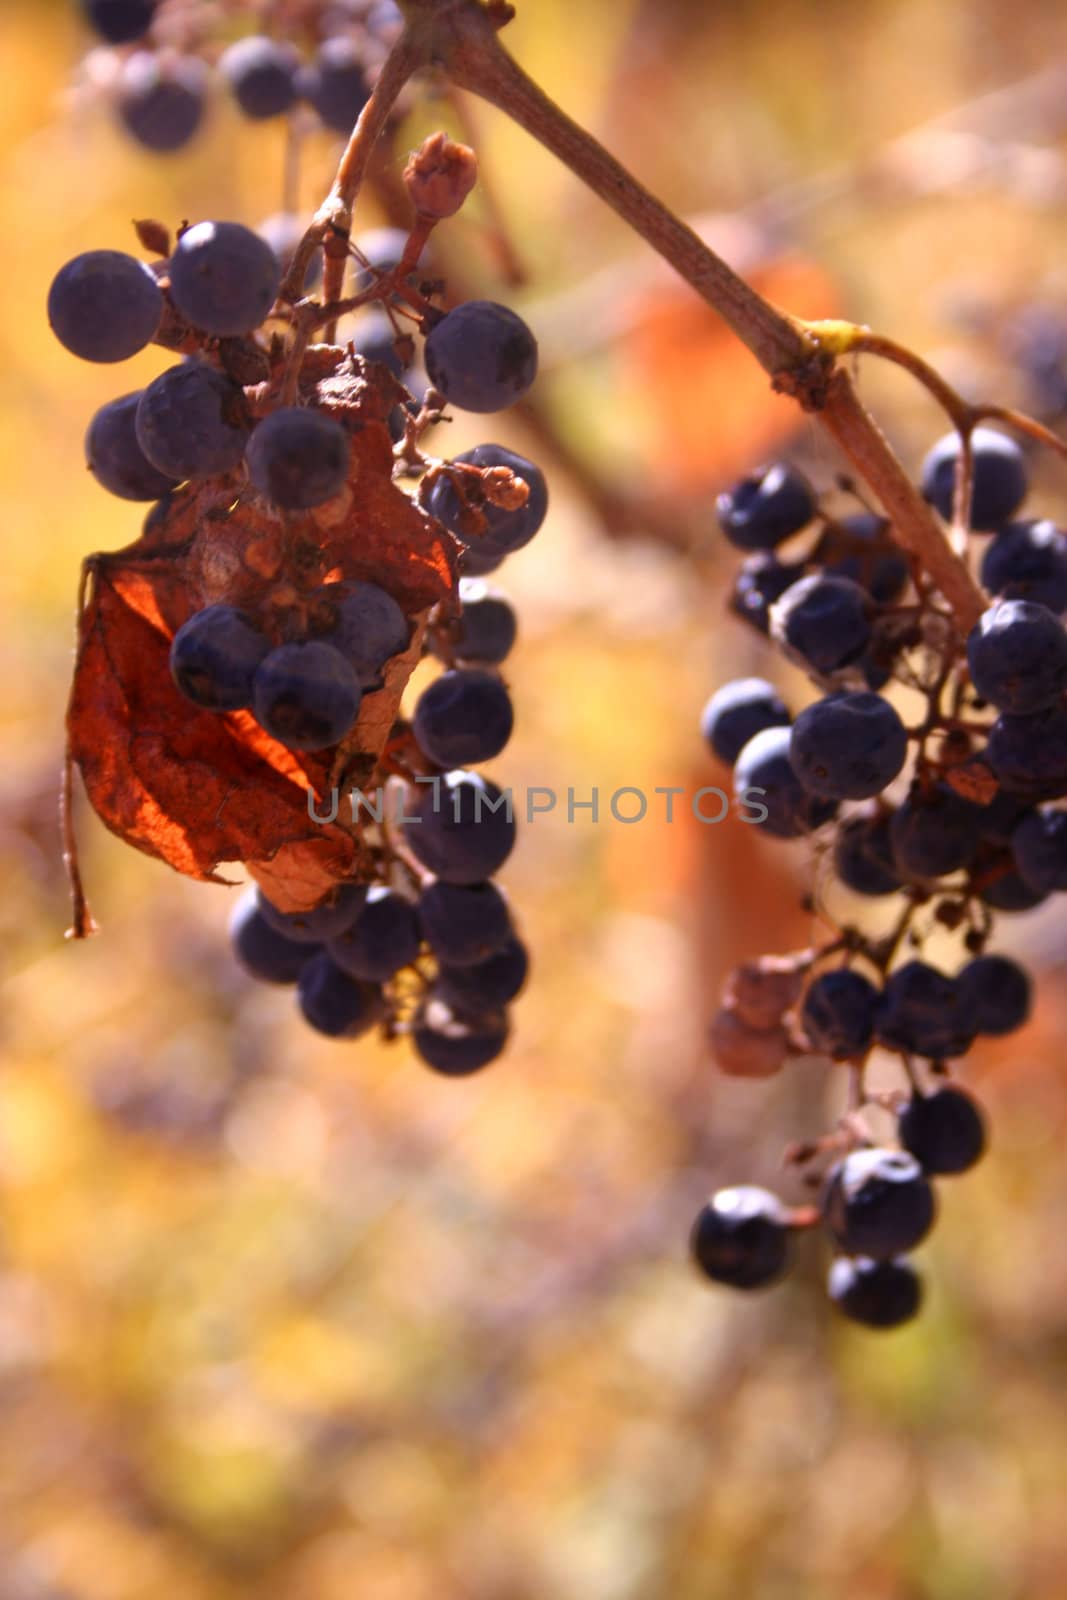 Wild grapes in an autumn setting